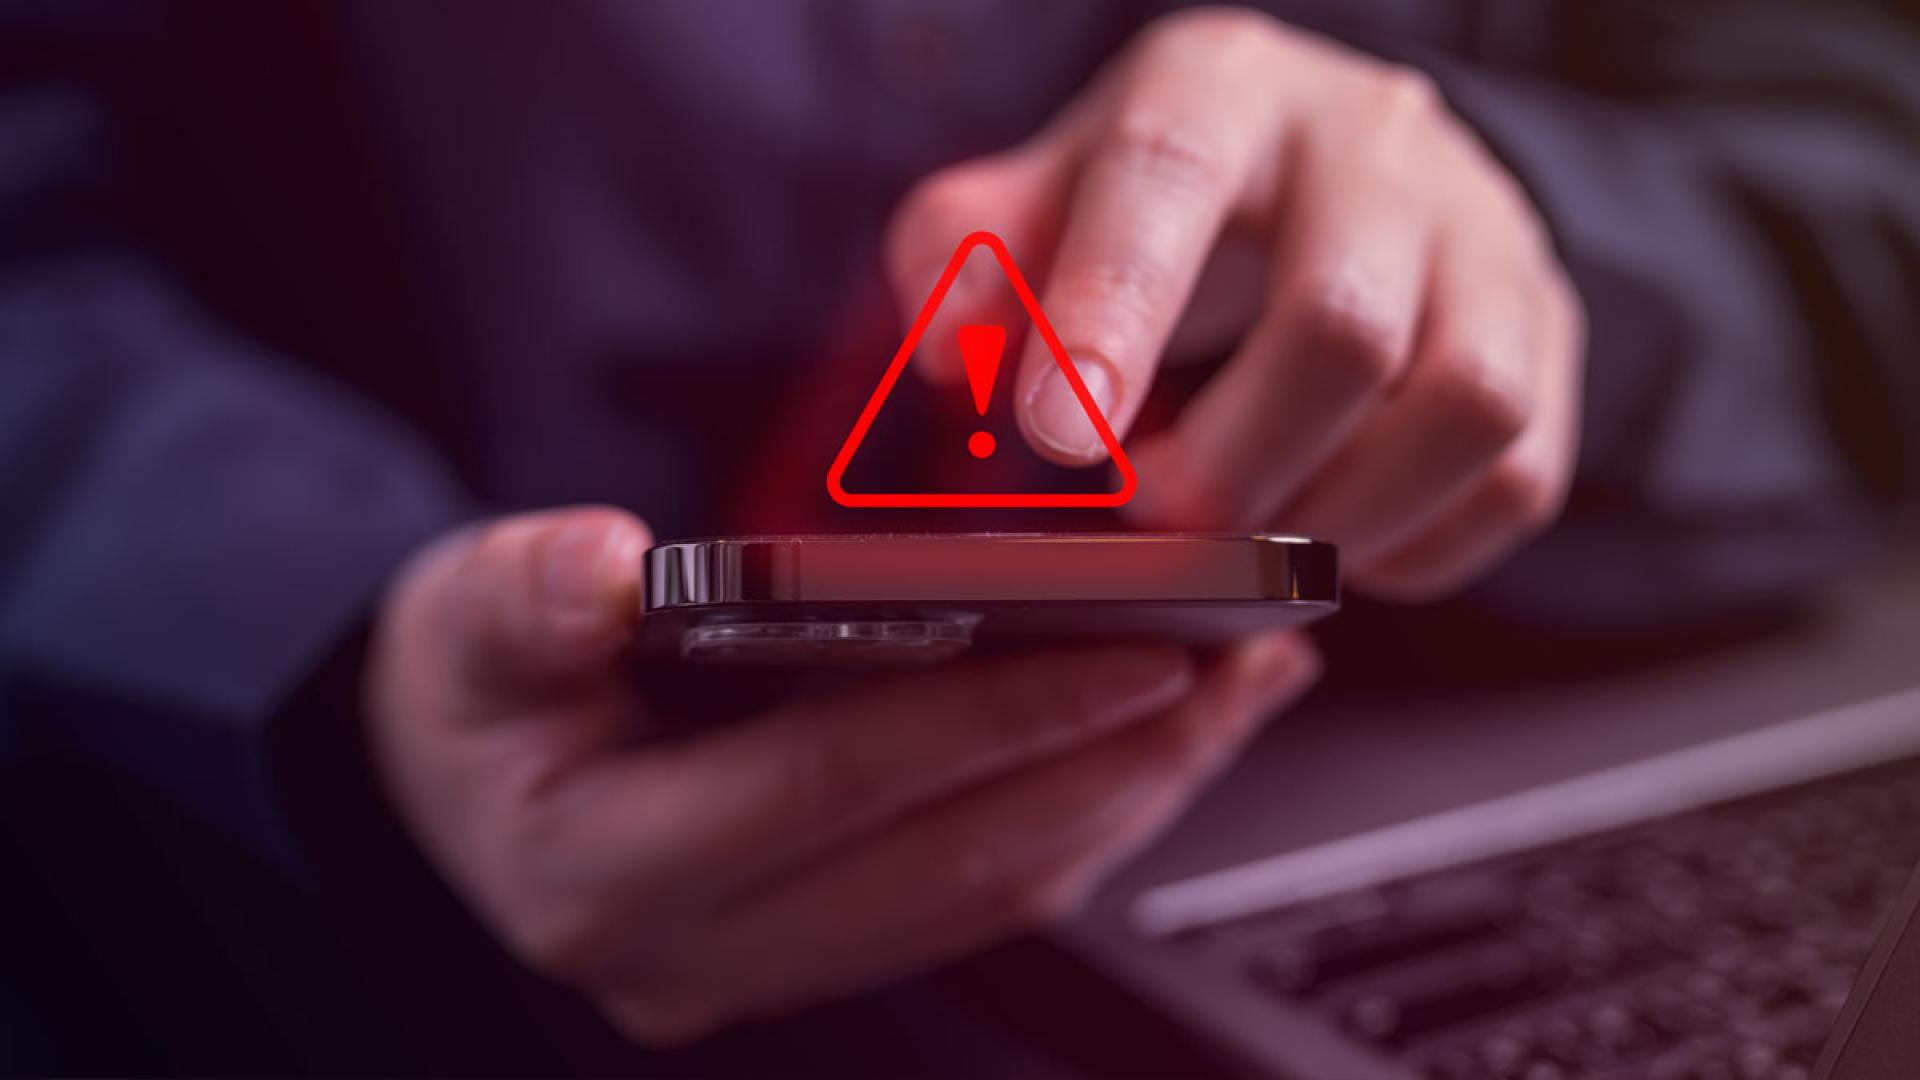 Warning icon above a phone screen